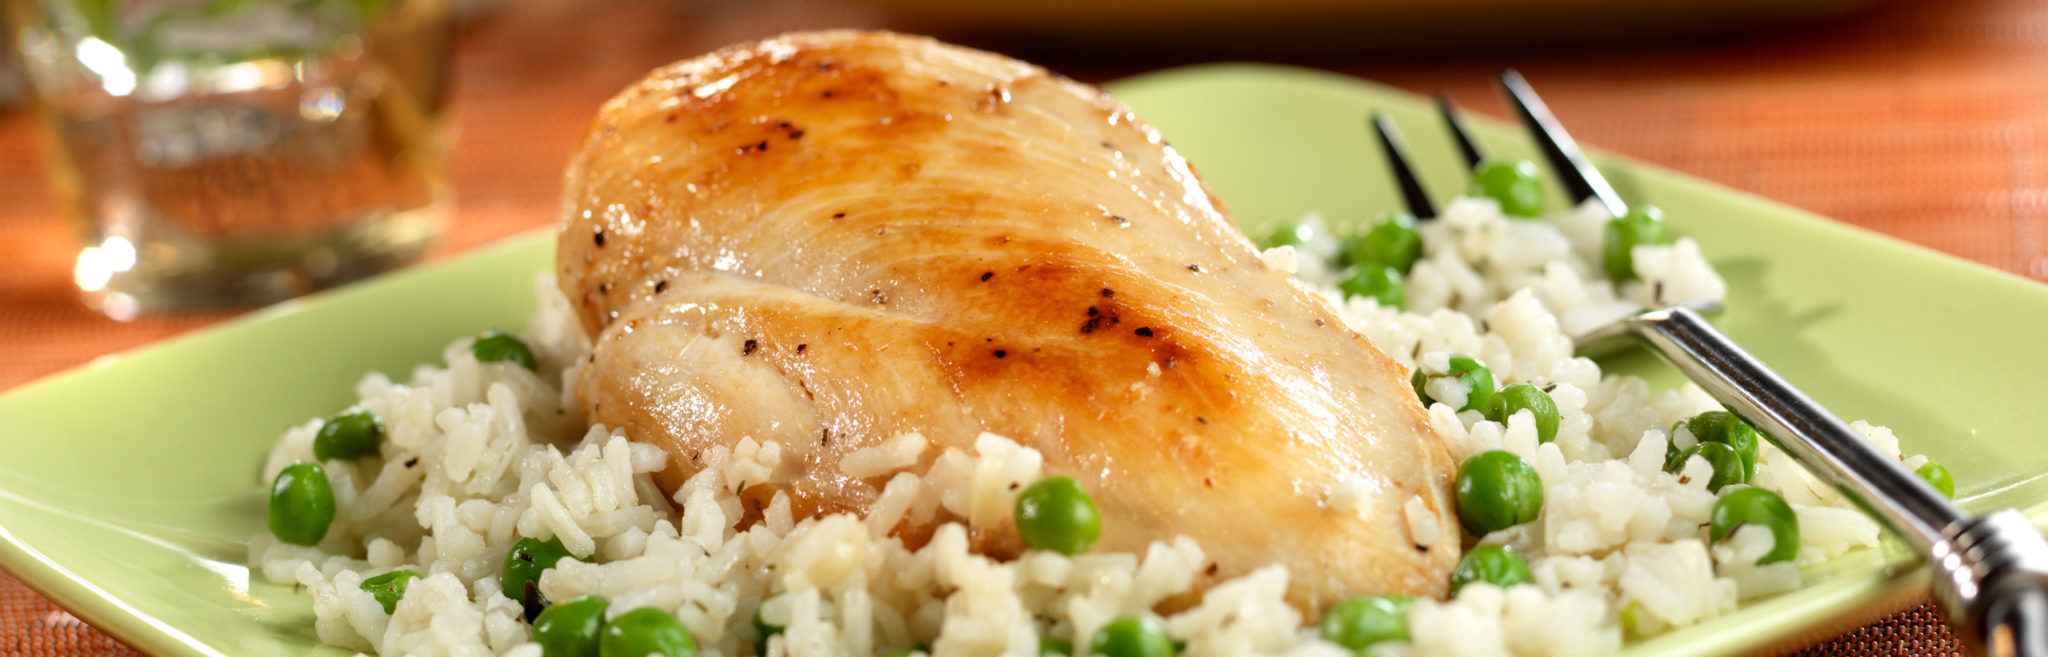 Chicken with Savory Herbed Rice - Swanson